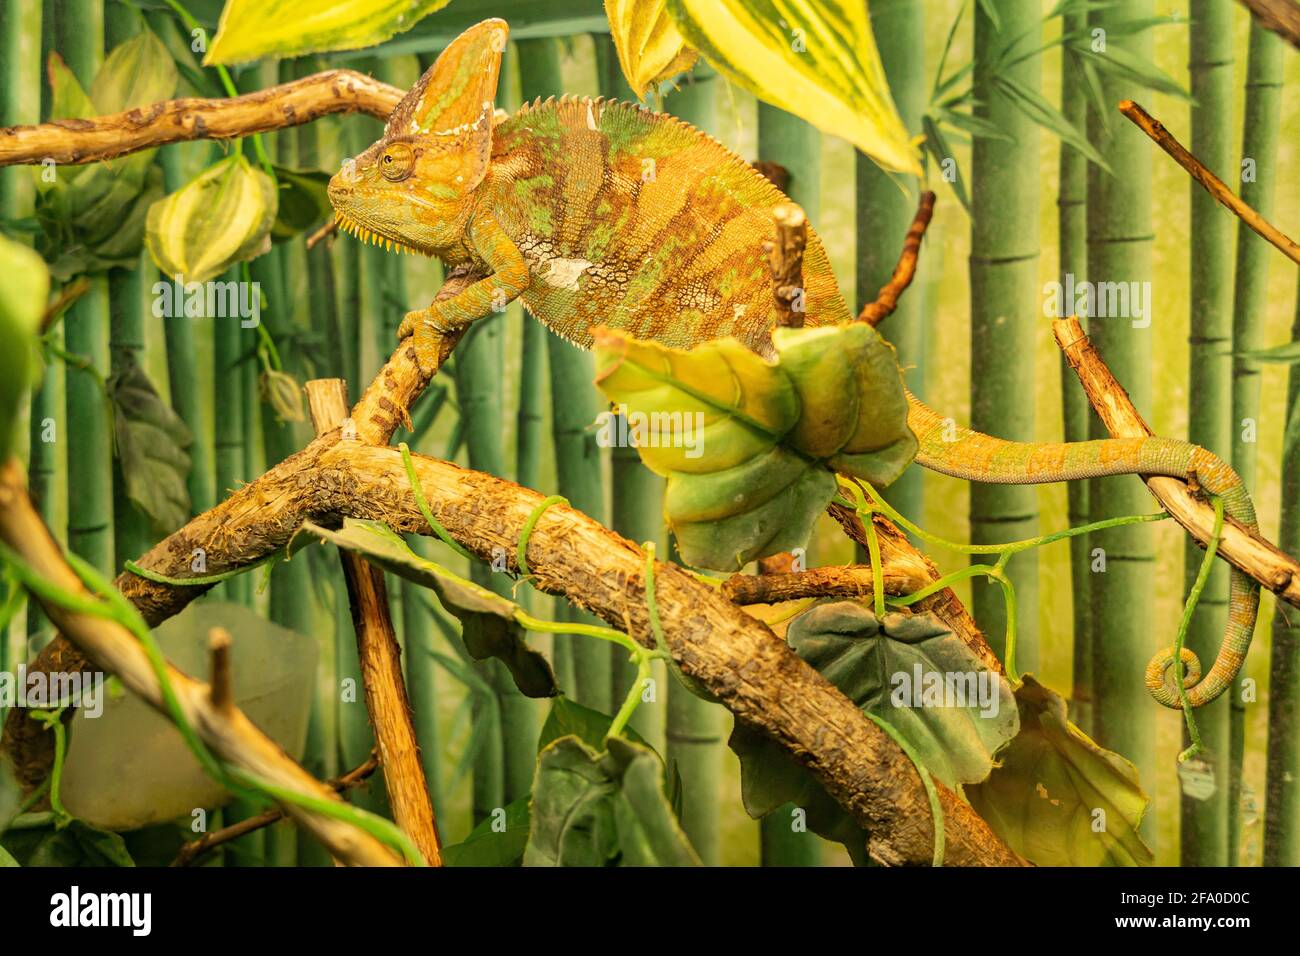 Chameleon disguises itself among the leaves of trees in the rainforest, the green chameleon merges with the environment Stock Photo